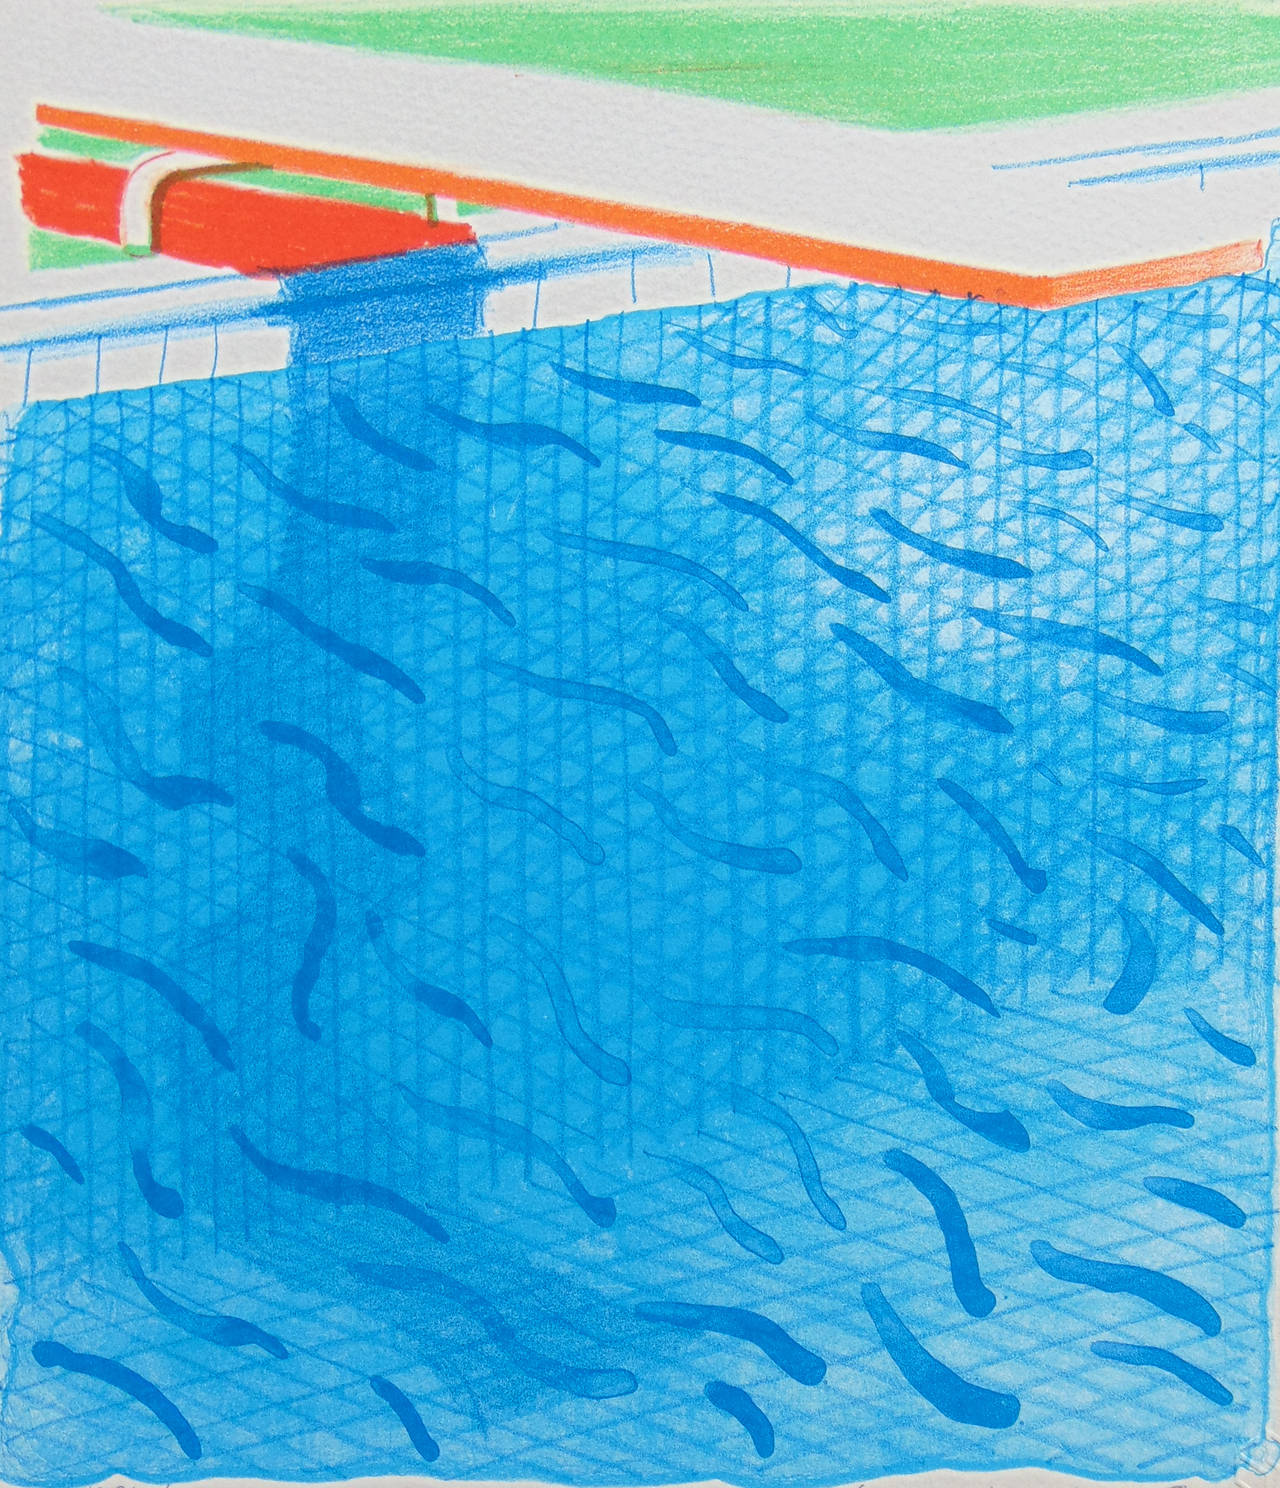 Pool made with Paper and Blue Ink for a Book, 1980, by David Hockney